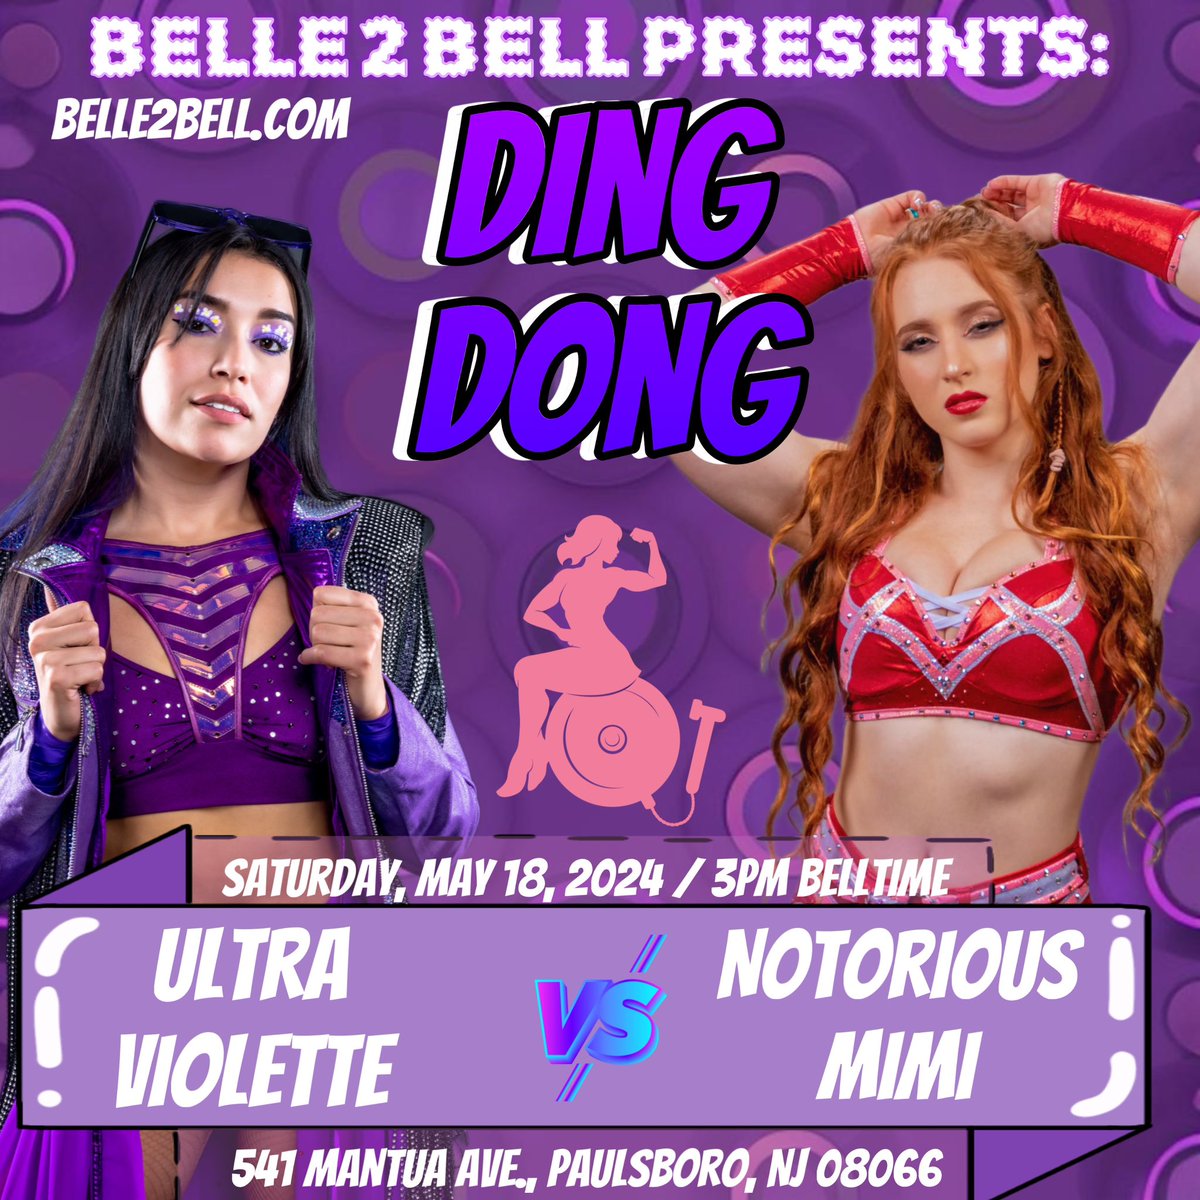 Our main event for May 18th sees two of the best female wrestlers on the east coast lock up for the first time in a singles match! Ultra Violette takes on Notorious Mimi! Tickets are available at Belle2Bell.com!